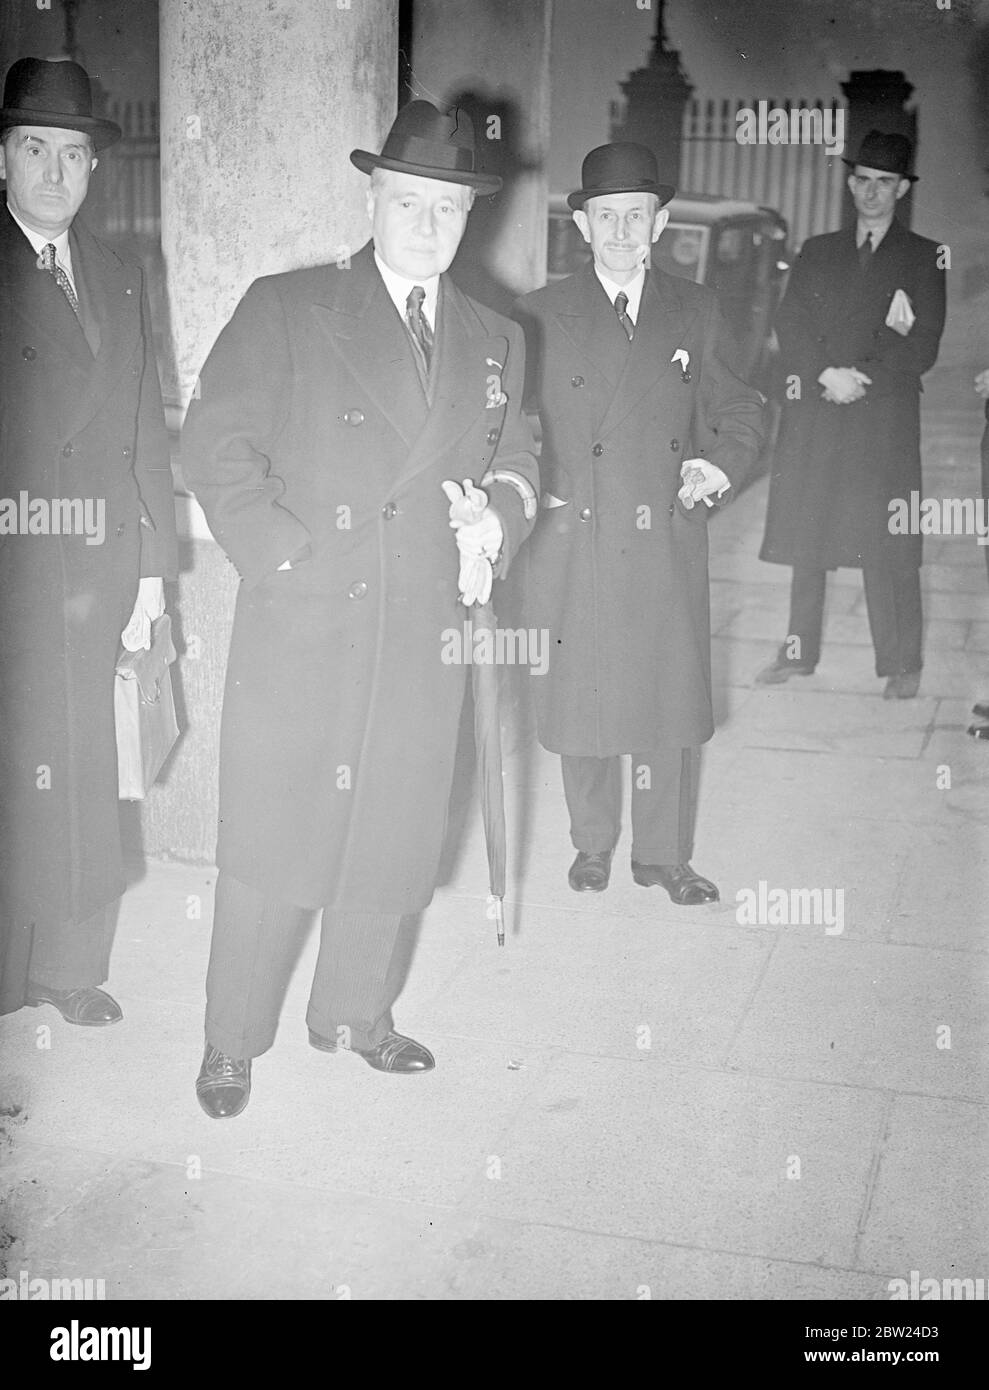 French commander-in-chief visits 10 Downing Street. General Gamelin, who flew to London this morning, went to 10 Downing Street with M Daladier, French Premier, and M Bonnet, Foreign Minister, for discussions with the British Cabinet. Photo shows, General Gamelin, French commander-in-chief, leaving the French embassy 10 Downing Street. 26 September 1938 Stock Photo